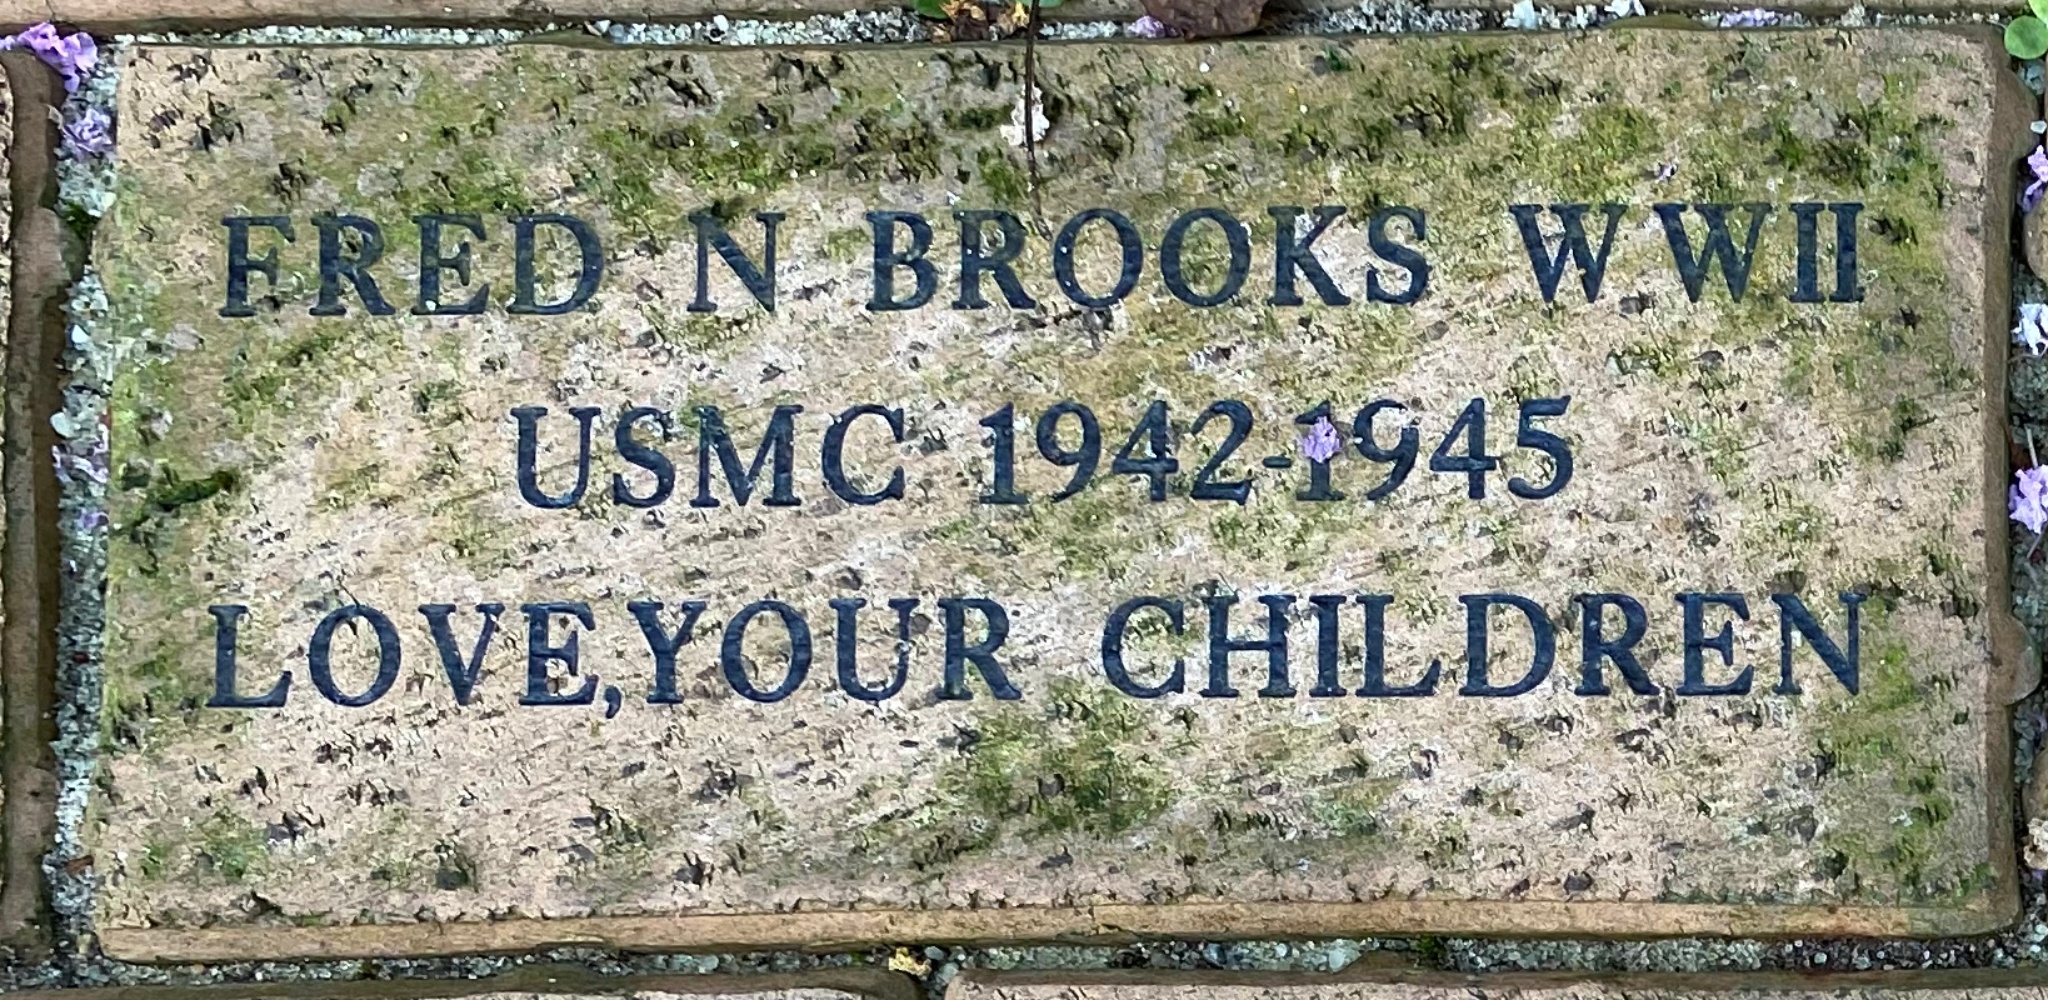 FRED N BROOKS WWII USMC 1942-1945 LOVE,YOUR CHILDREN